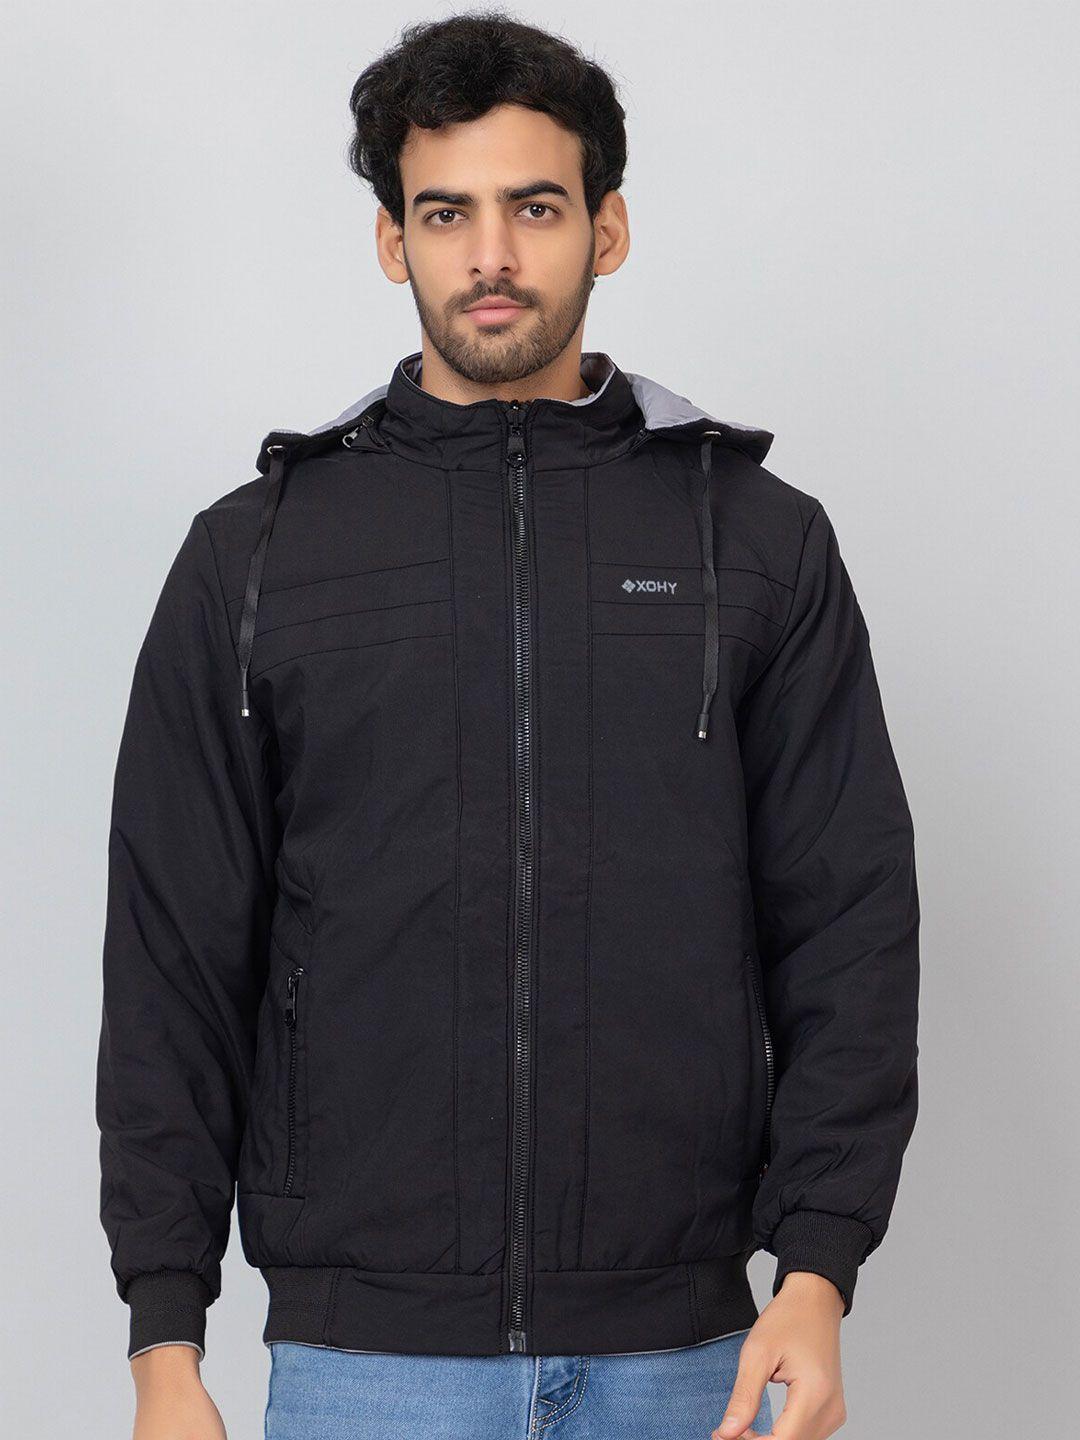 xohy-lightweight-hooded-cotton-bomber-jacket